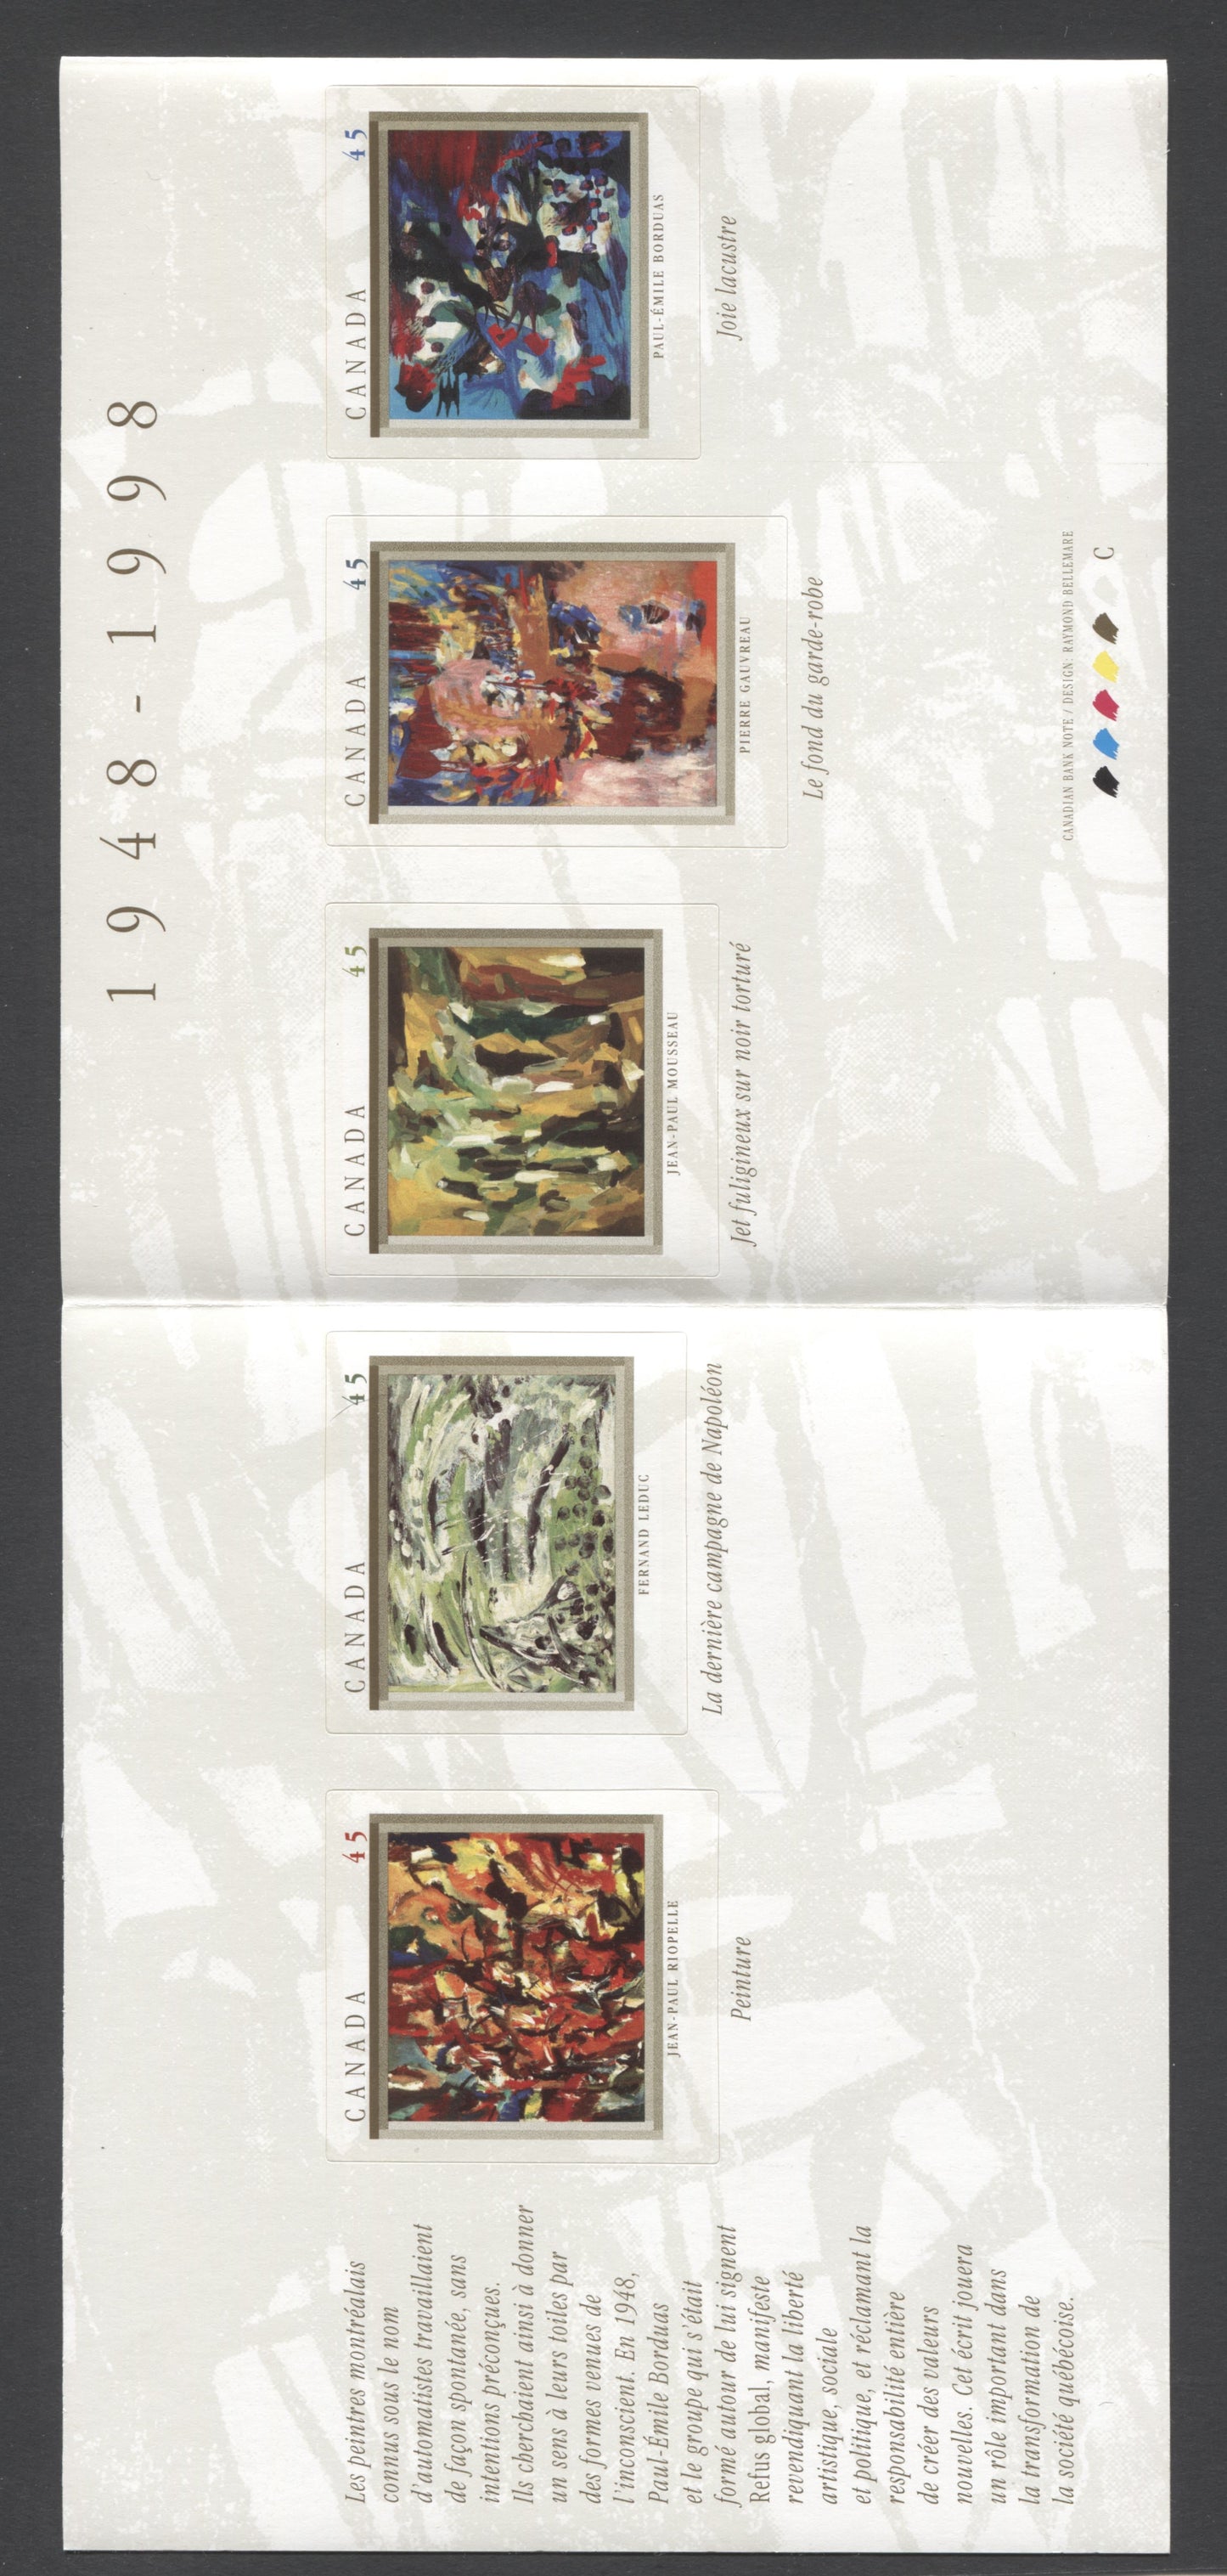 Canada #BK209a 1998 The Automatistes Issue, Complete $3.15 Booklet, Tullis Russell Coatings Paper, Dead Paper, 4 mm GT-4 Tagging